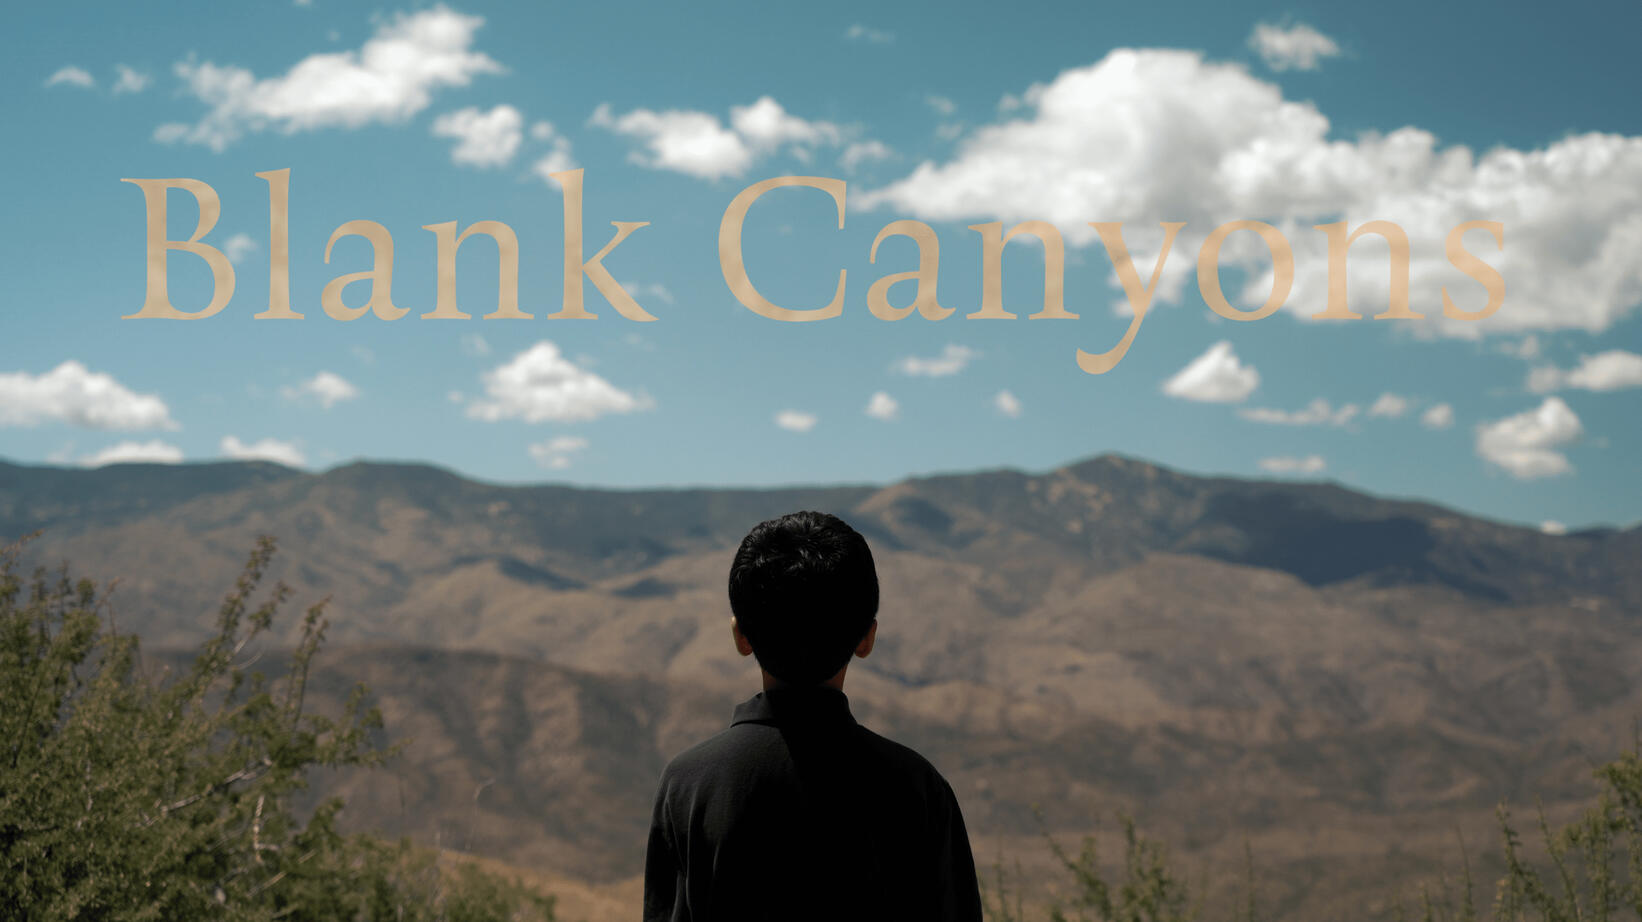 Blank Canyons